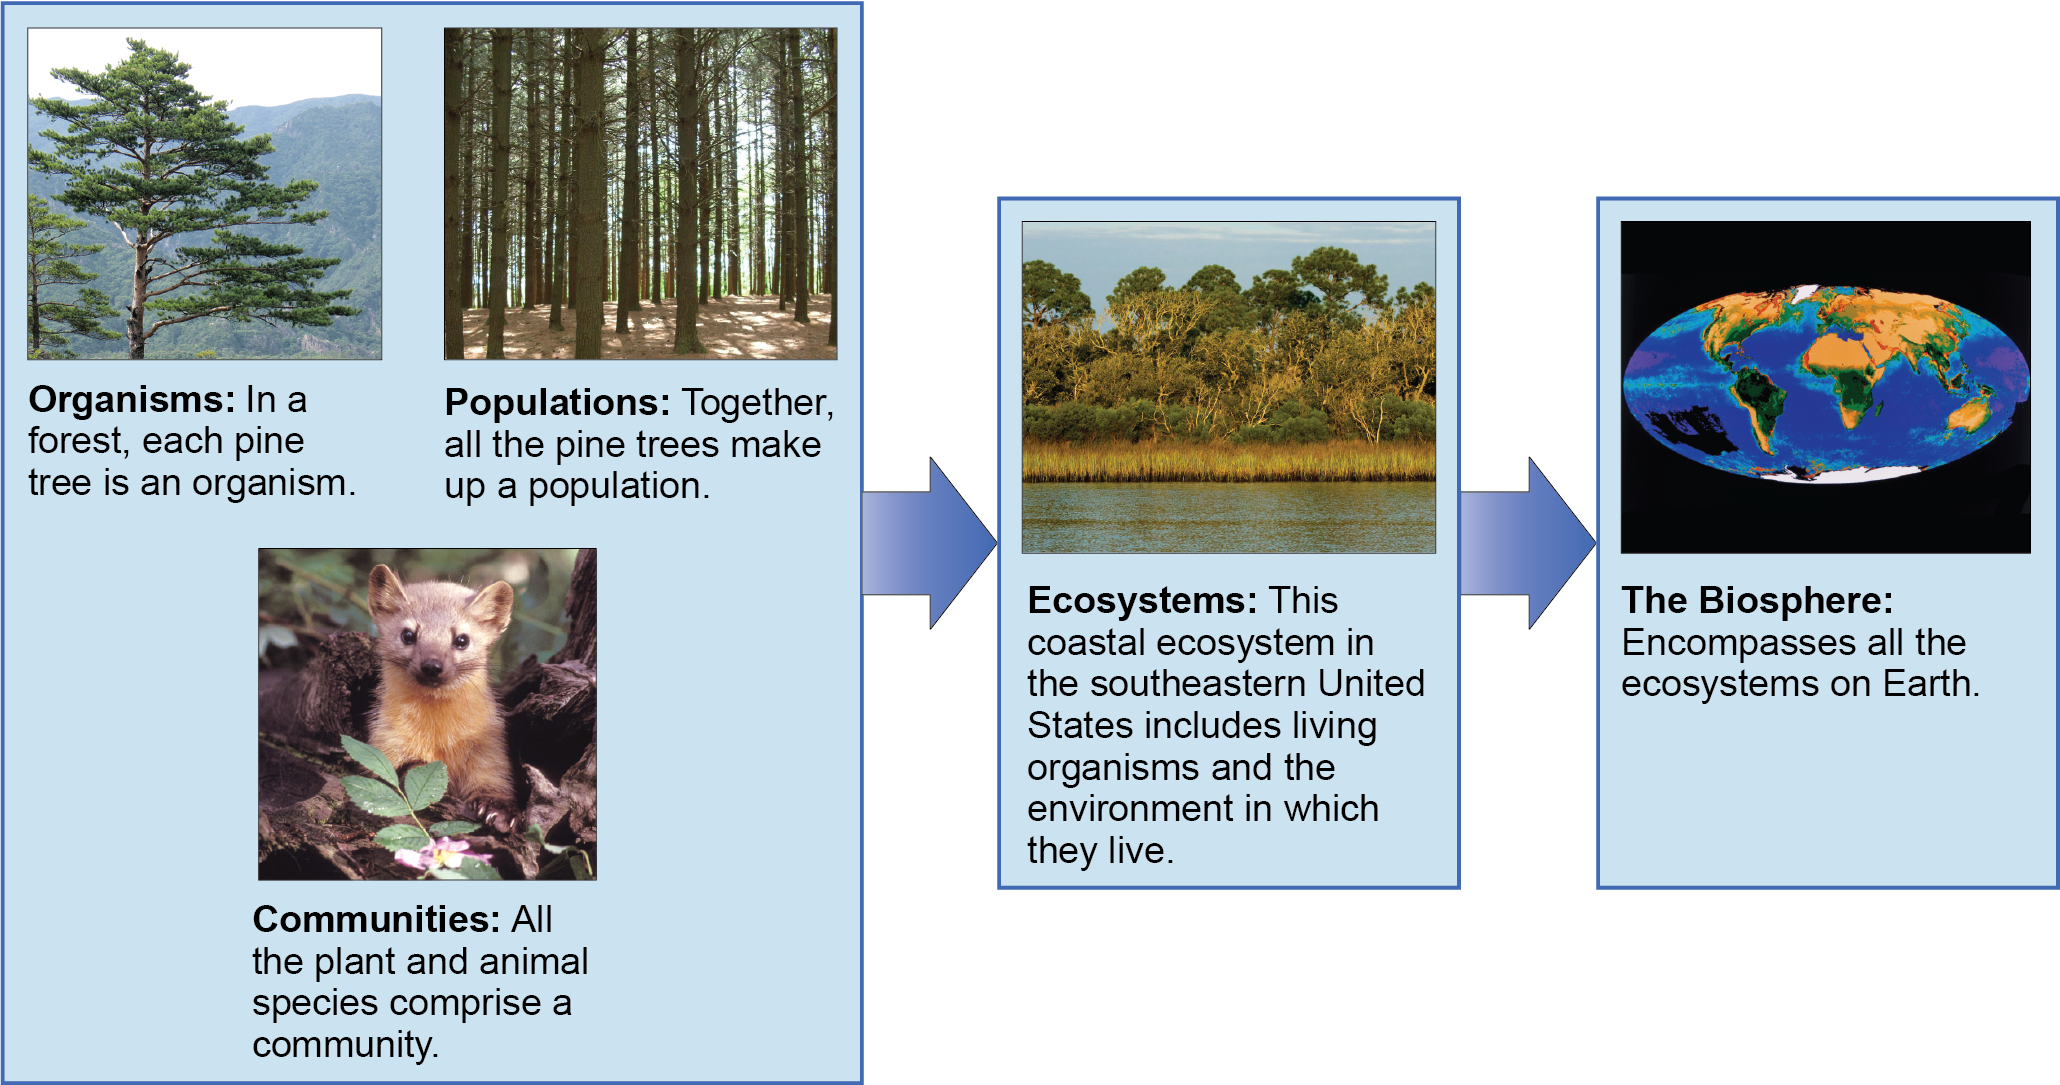 A flow chart of organism, population, community ecology, flowing to ecosystems then biosphere